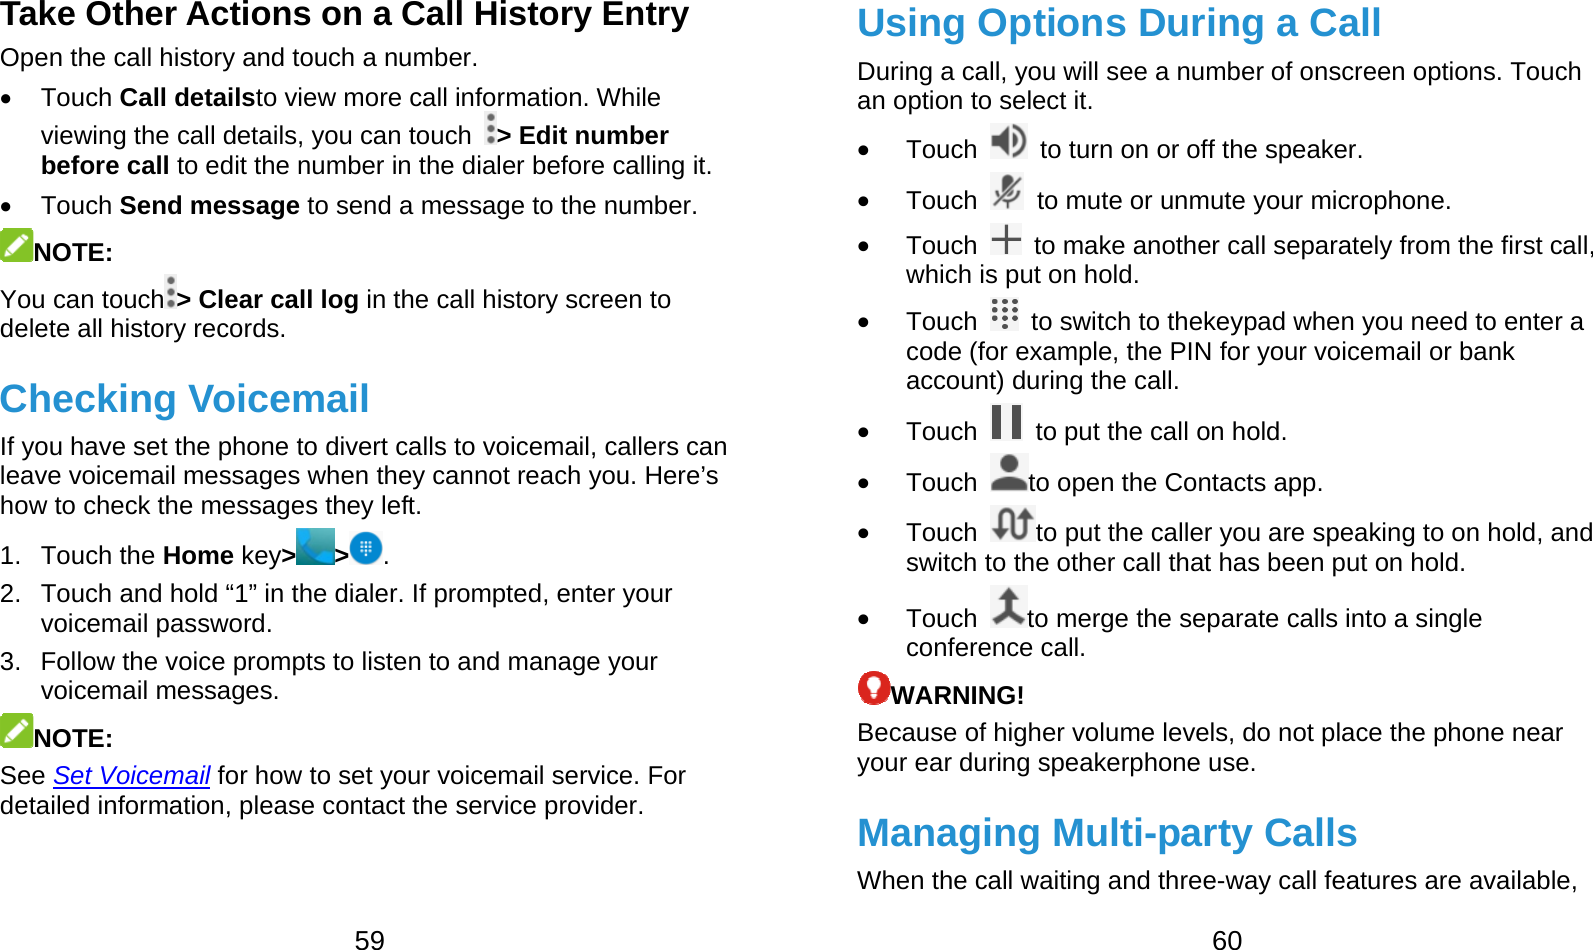  59 Take Other Actions on a Call History Entry Open the call history and touch a number.  Touch Call detailsto view more call information. While viewing the call details, you can touch  &gt; Edit number before call to edit the number in the dialer before calling it.  Touch Send message to send a message to the number. NOTE:  You can touch &gt; Clear call log in the call history screen to delete all history records. Checking Voicemail If you have set the phone to divert calls to voicemail, callers can leave voicemail messages when they cannot reach you. Here’s how to check the messages they left. 1. Touch the Home key&gt;&gt;. 2.  Touch and hold “1” in the dialer. If prompted, enter your voicemail password.   3.  Follow the voice prompts to listen to and manage your voicemail messages. NOTE:  See Set Voicemail for how to set your voicemail service. For detailed information, please contact the service provider.  60 Using Options During a Call During a call, you will see a number of onscreen options. Touch an option to select it.  Touch    to turn on or off the speaker.  Touch    to mute or unmute your microphone.  Touch    to make another call separately from the first call, which is put on hold.  Touch    to switch to thekeypad when you need to enter a code (for example, the PIN for your voicemail or bank account) during the call.  Touch    to put the call on hold.  Touch  to open the Contacts app.  Touch  to put the caller you are speaking to on hold, and switch to the other call that has been put on hold.  Touch  to merge the separate calls into a single conference call. WARNING! Because of higher volume levels, do not place the phone near your ear during speakerphone use. Managing Multi-party Calls When the call waiting and three-way call features are available, 